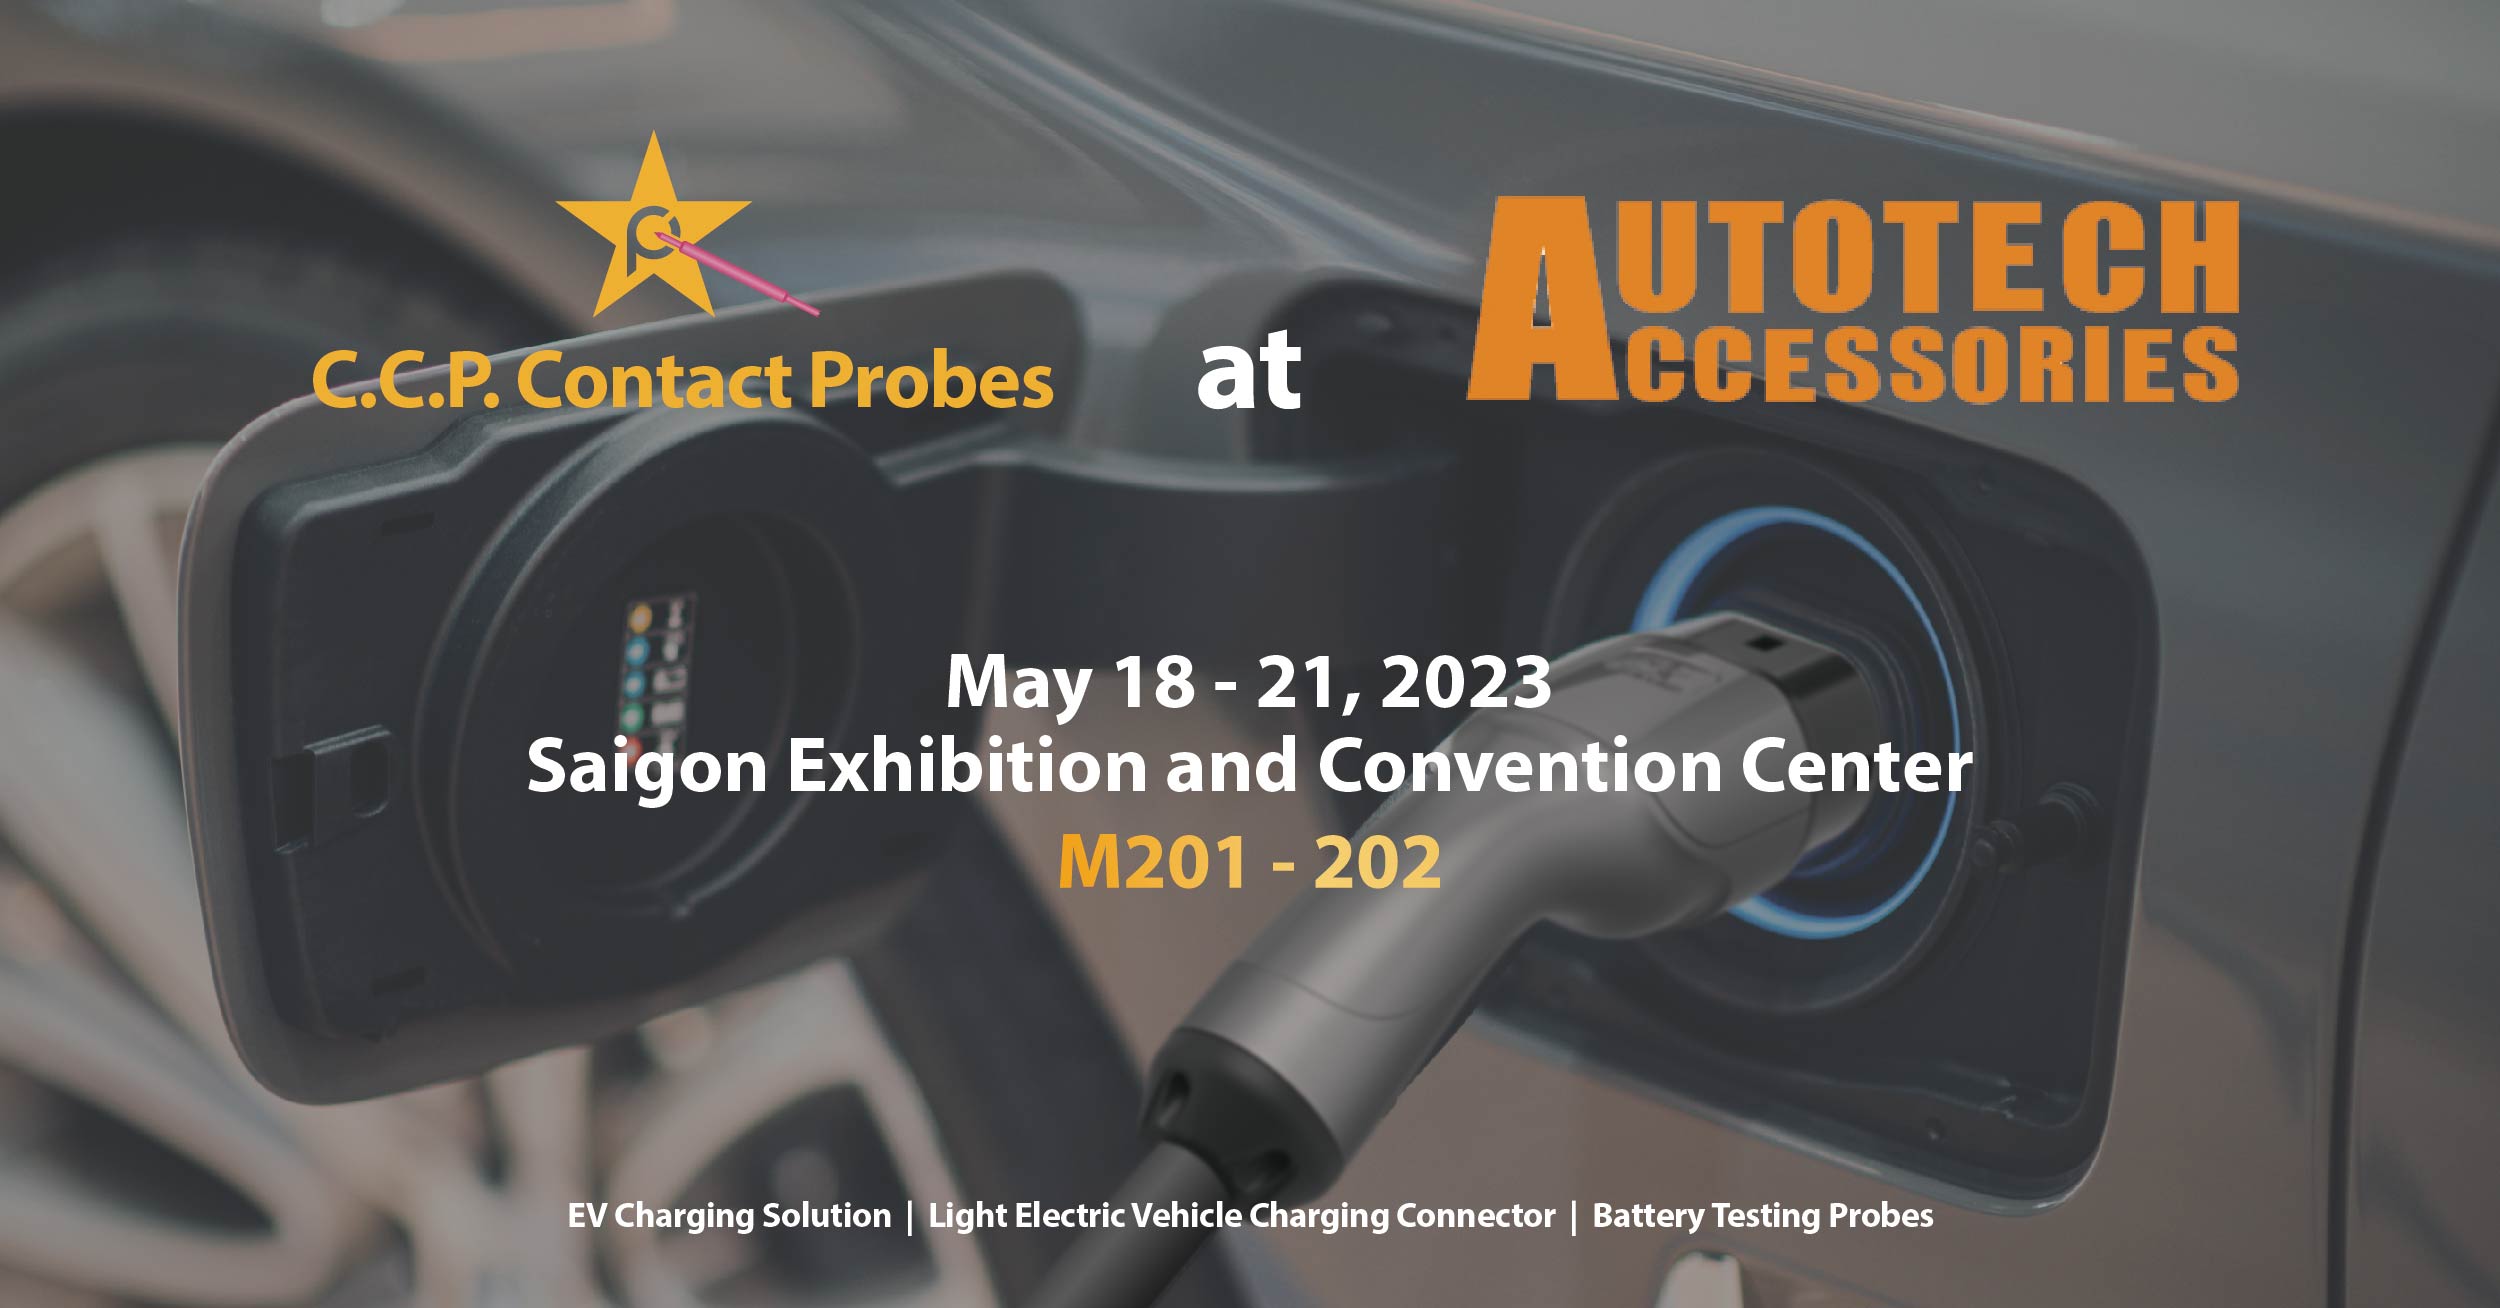 Meet CCP at Autotech &amp; Accessories Vietnam 18th-21th May!